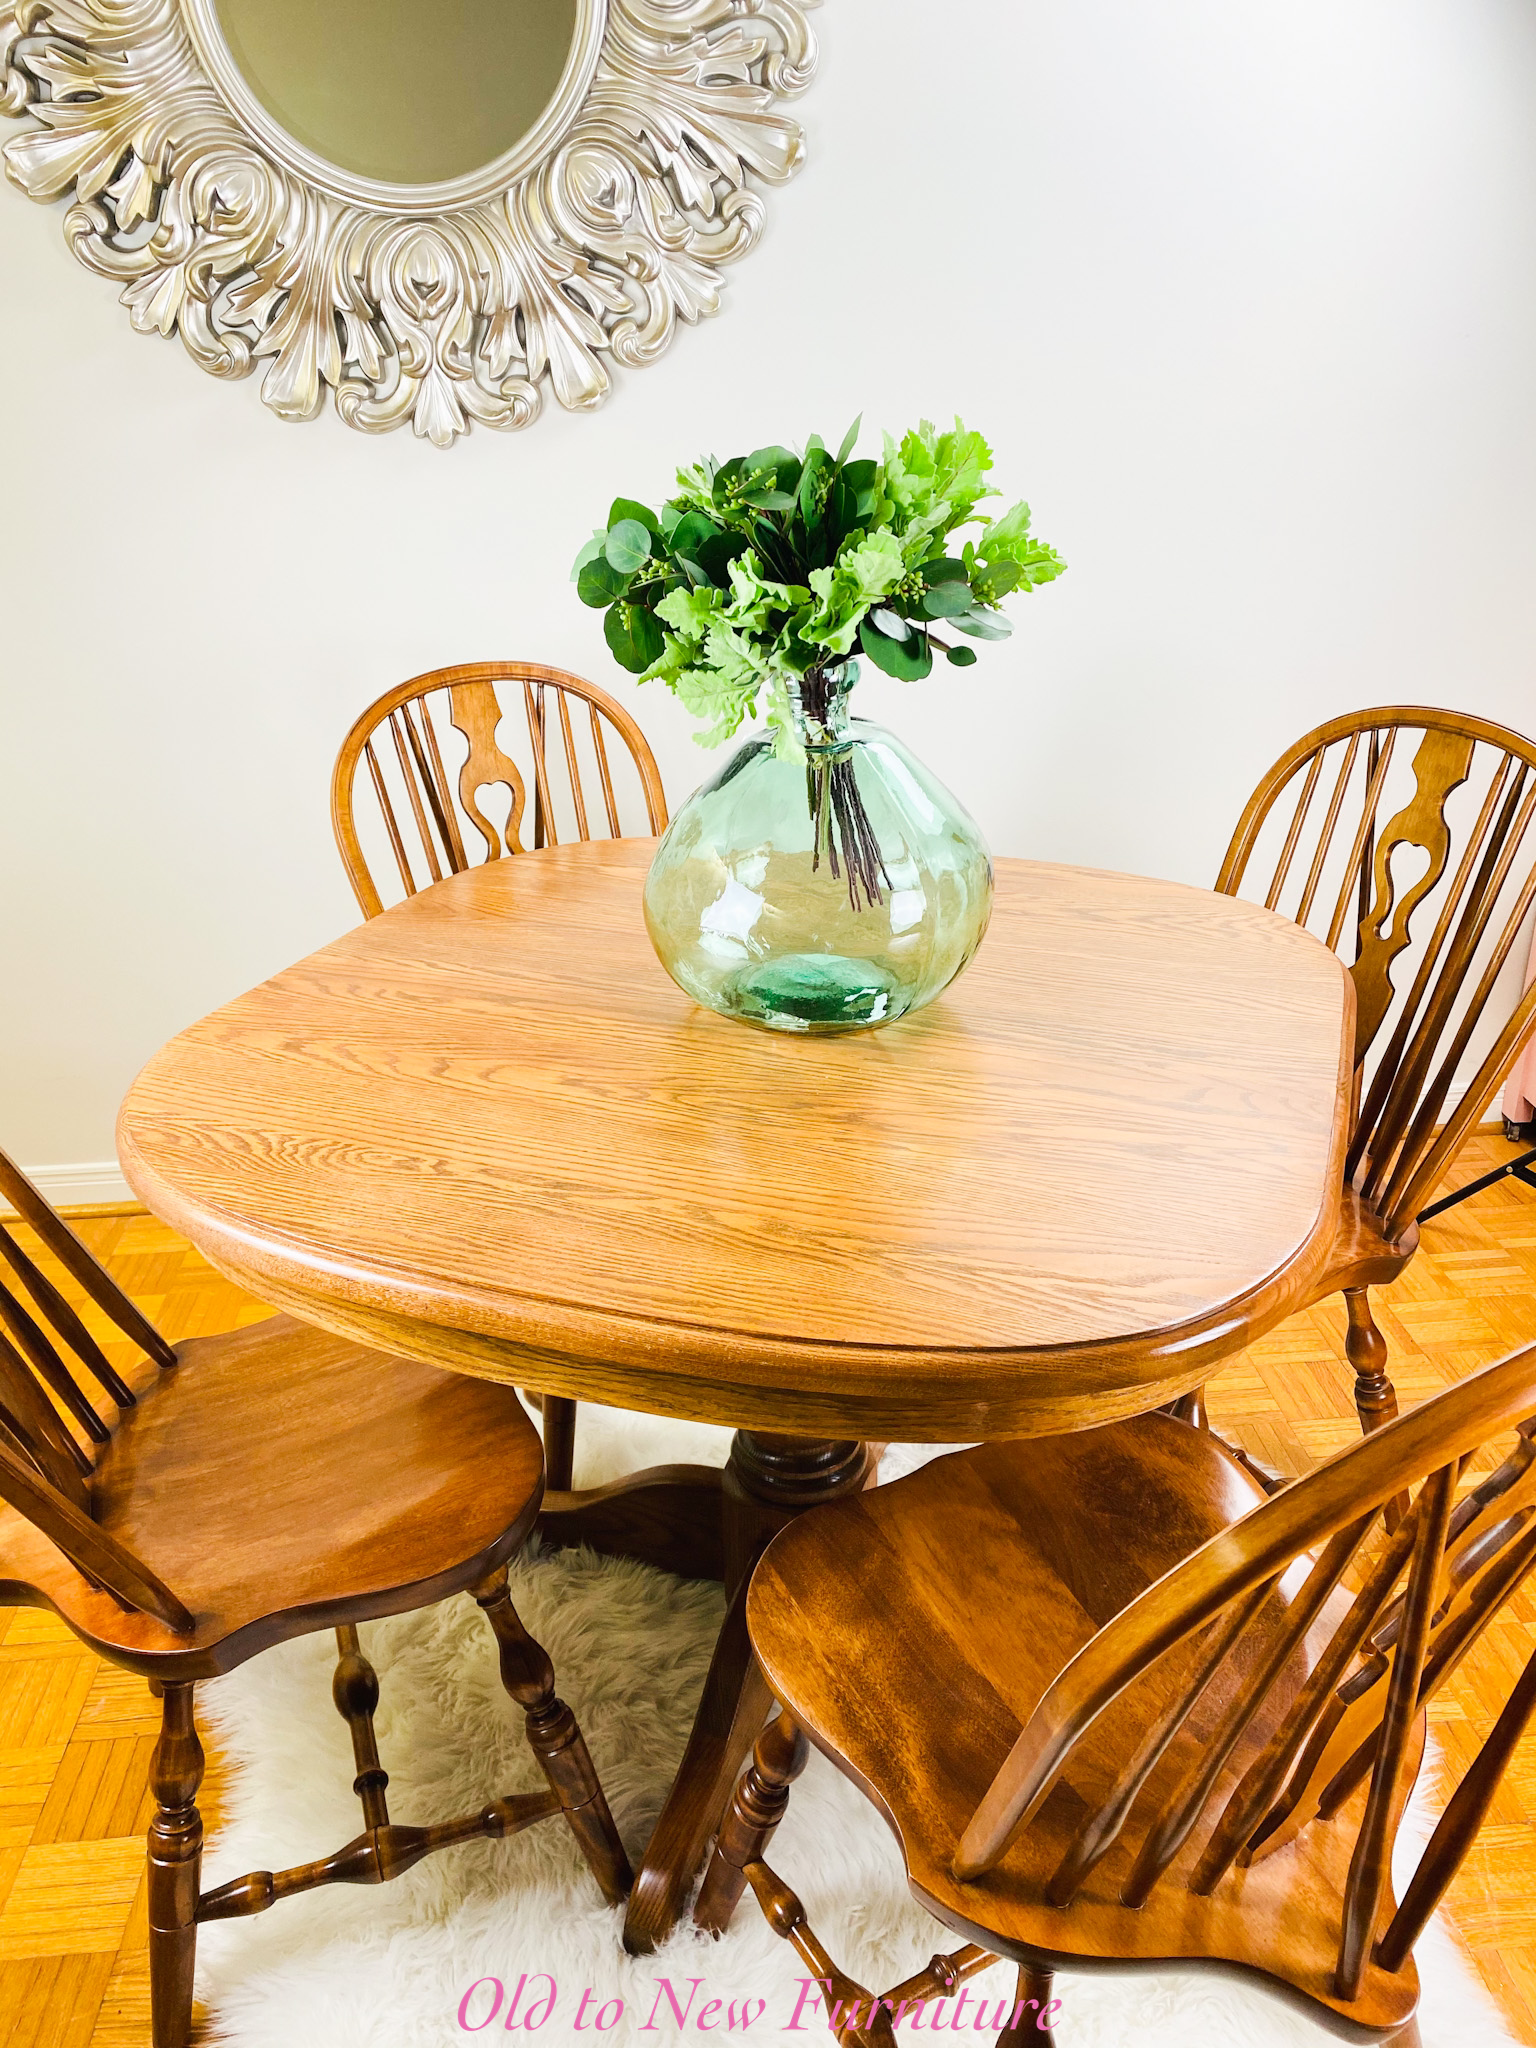 Refinished Natural Hardwood Dining Table & Chair Set